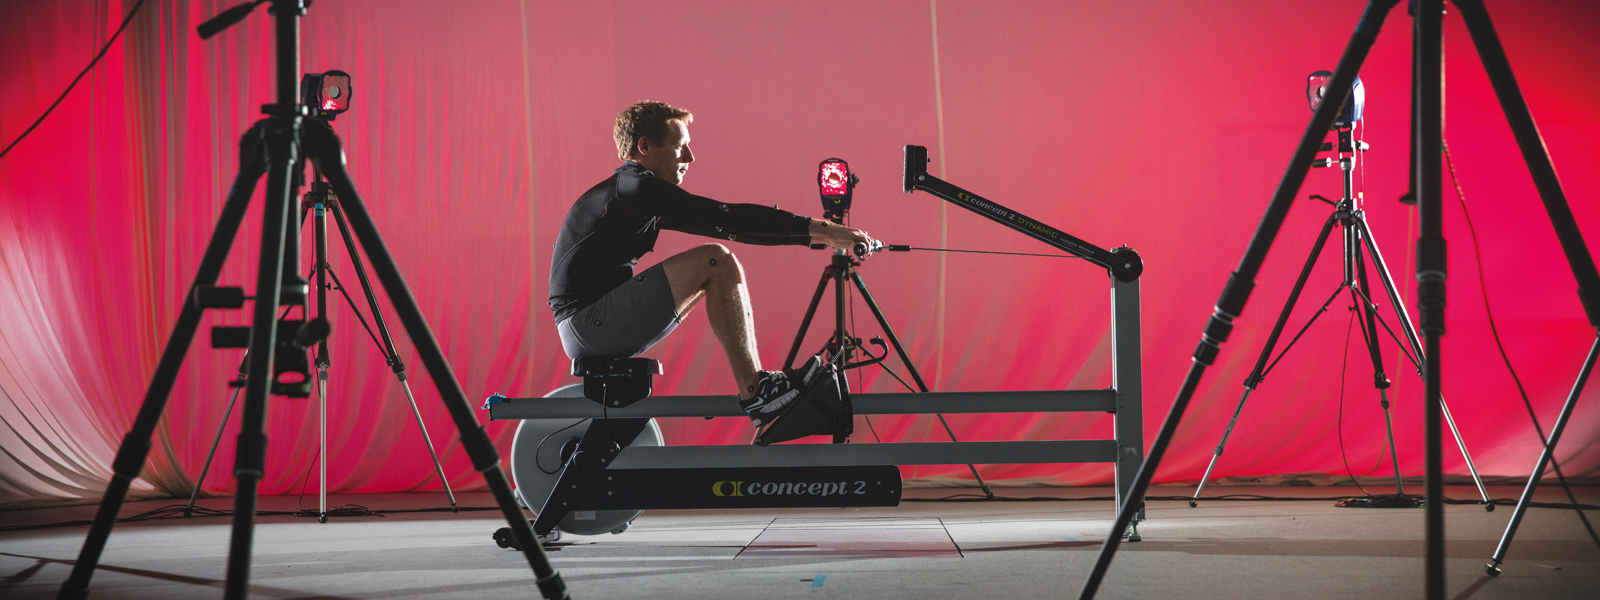 Rower in motion capture hub